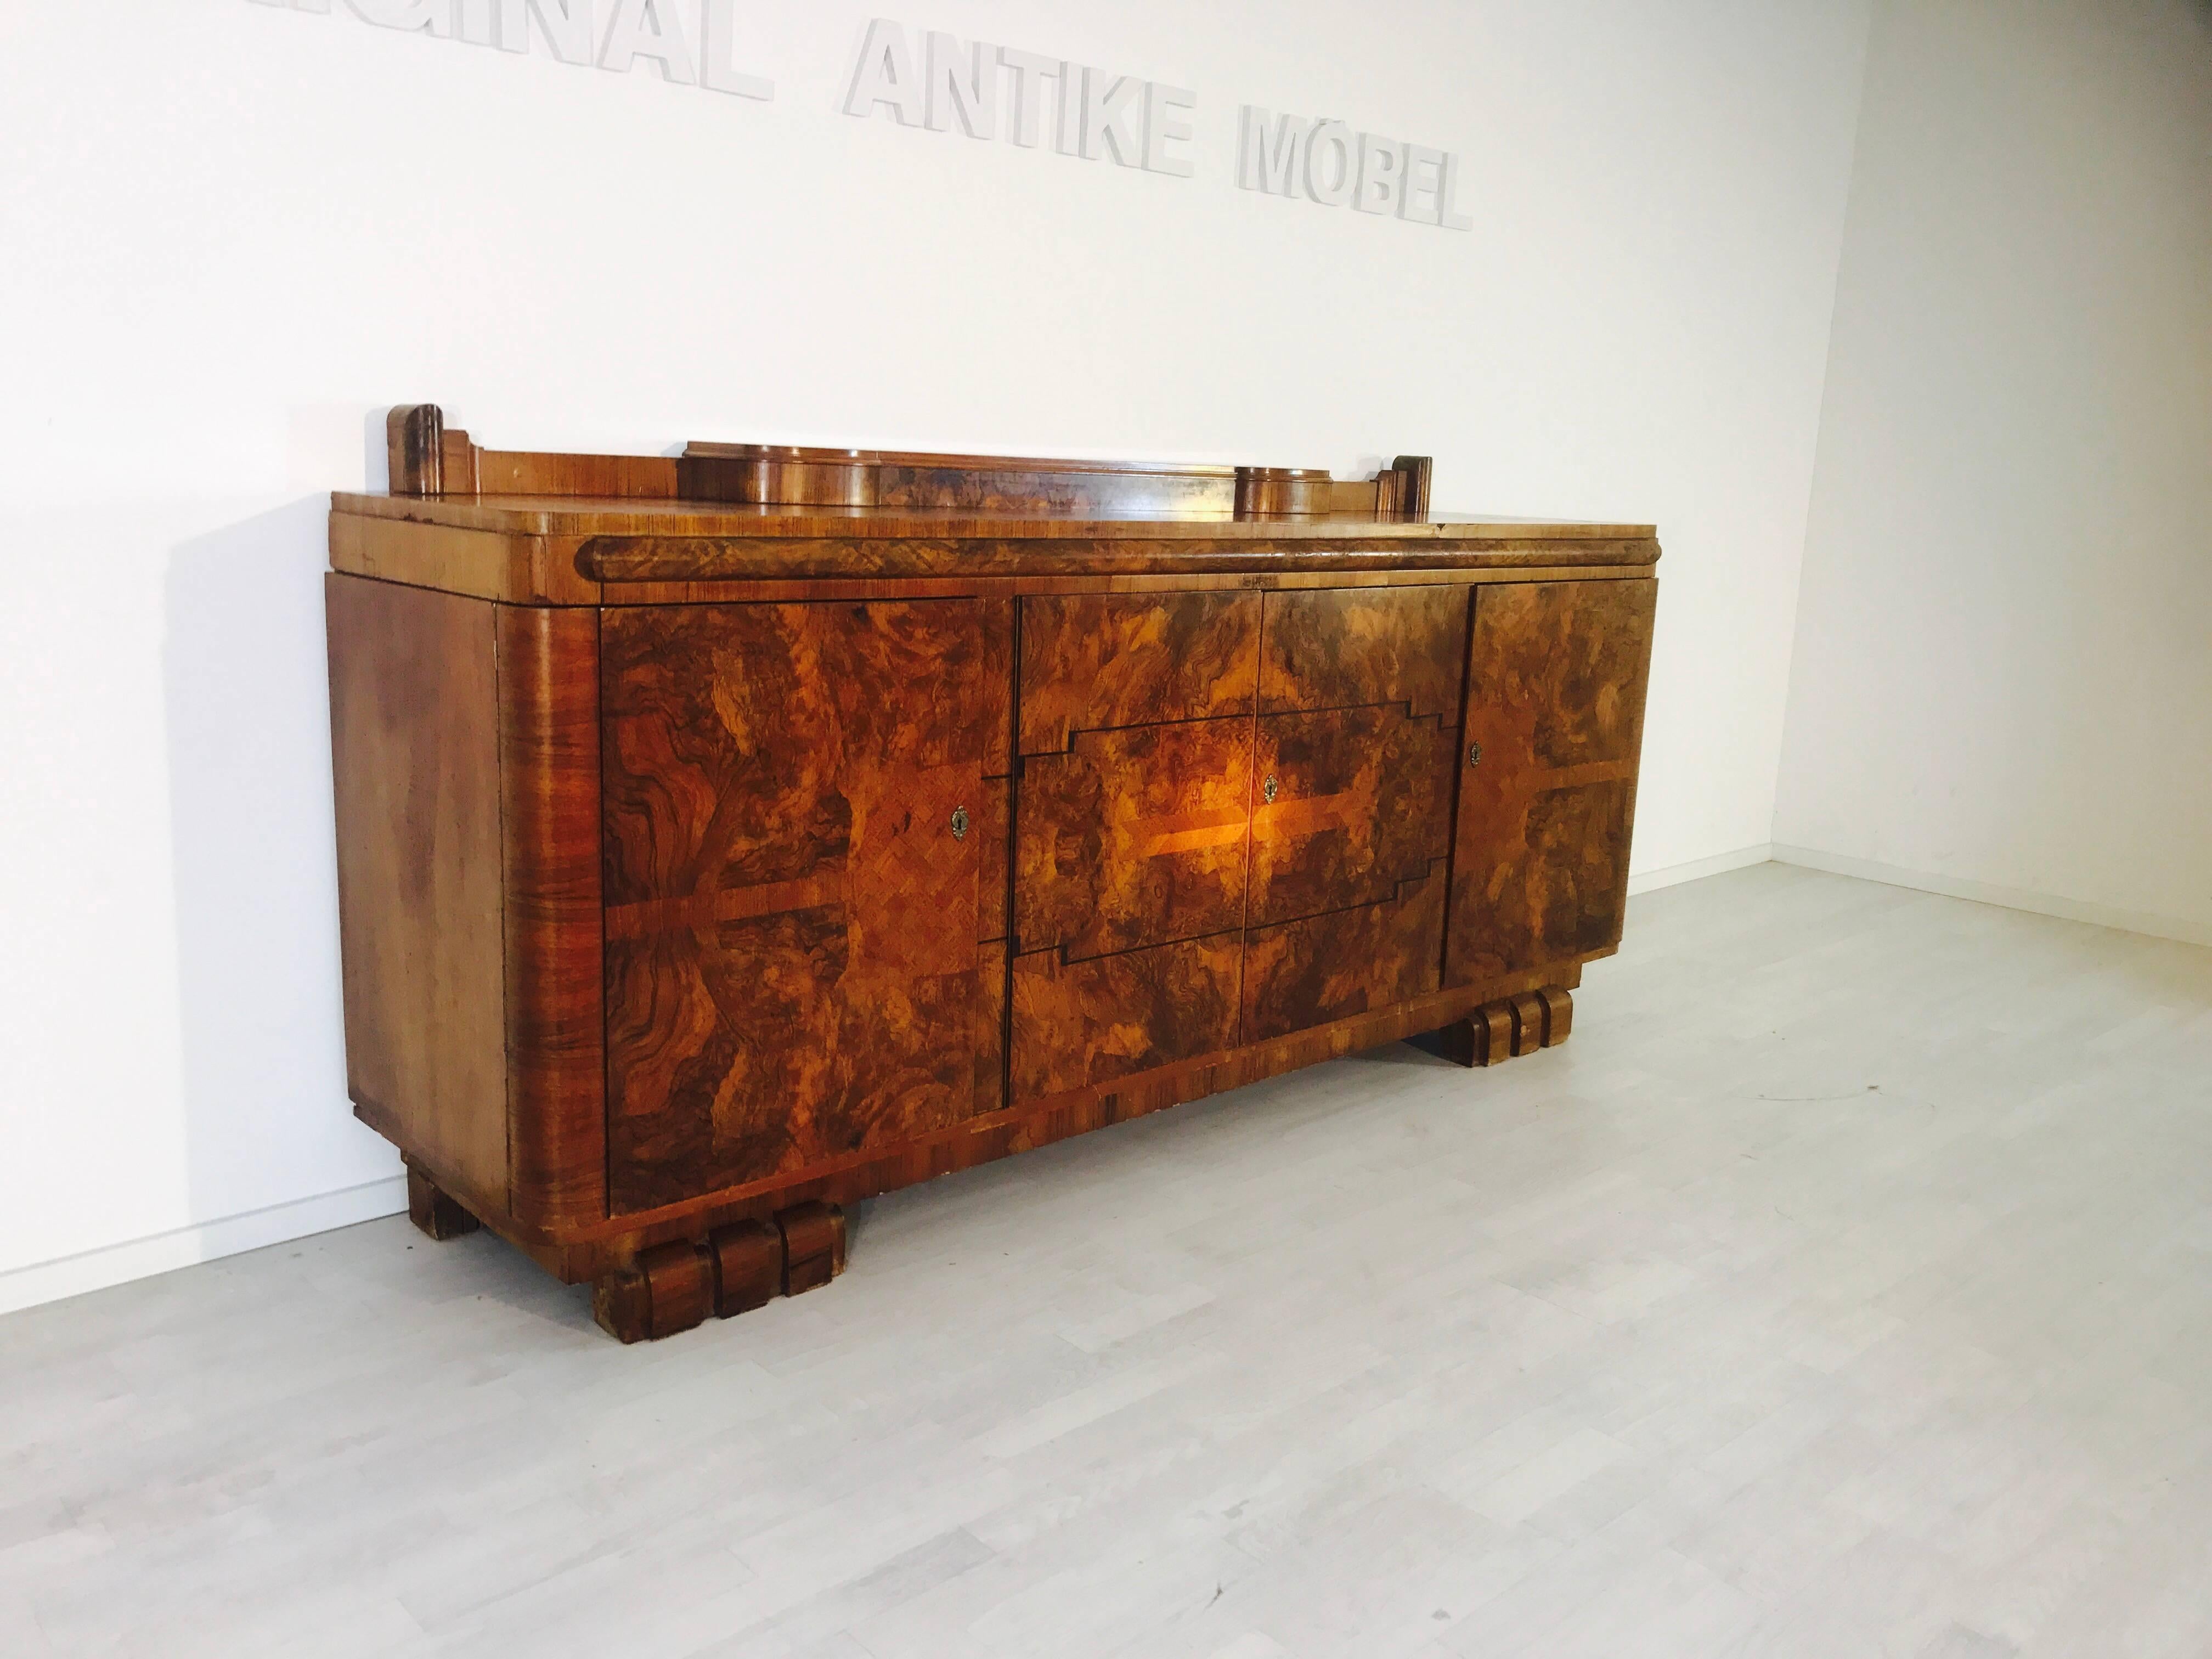 An Art Deco sideboard in walnut wood. Remarkable is the unique grain with the marvelous marquetry on the doors. As can be seen in the pictures, there is a lot of storage space in the interior of the piece of furniture with various storage